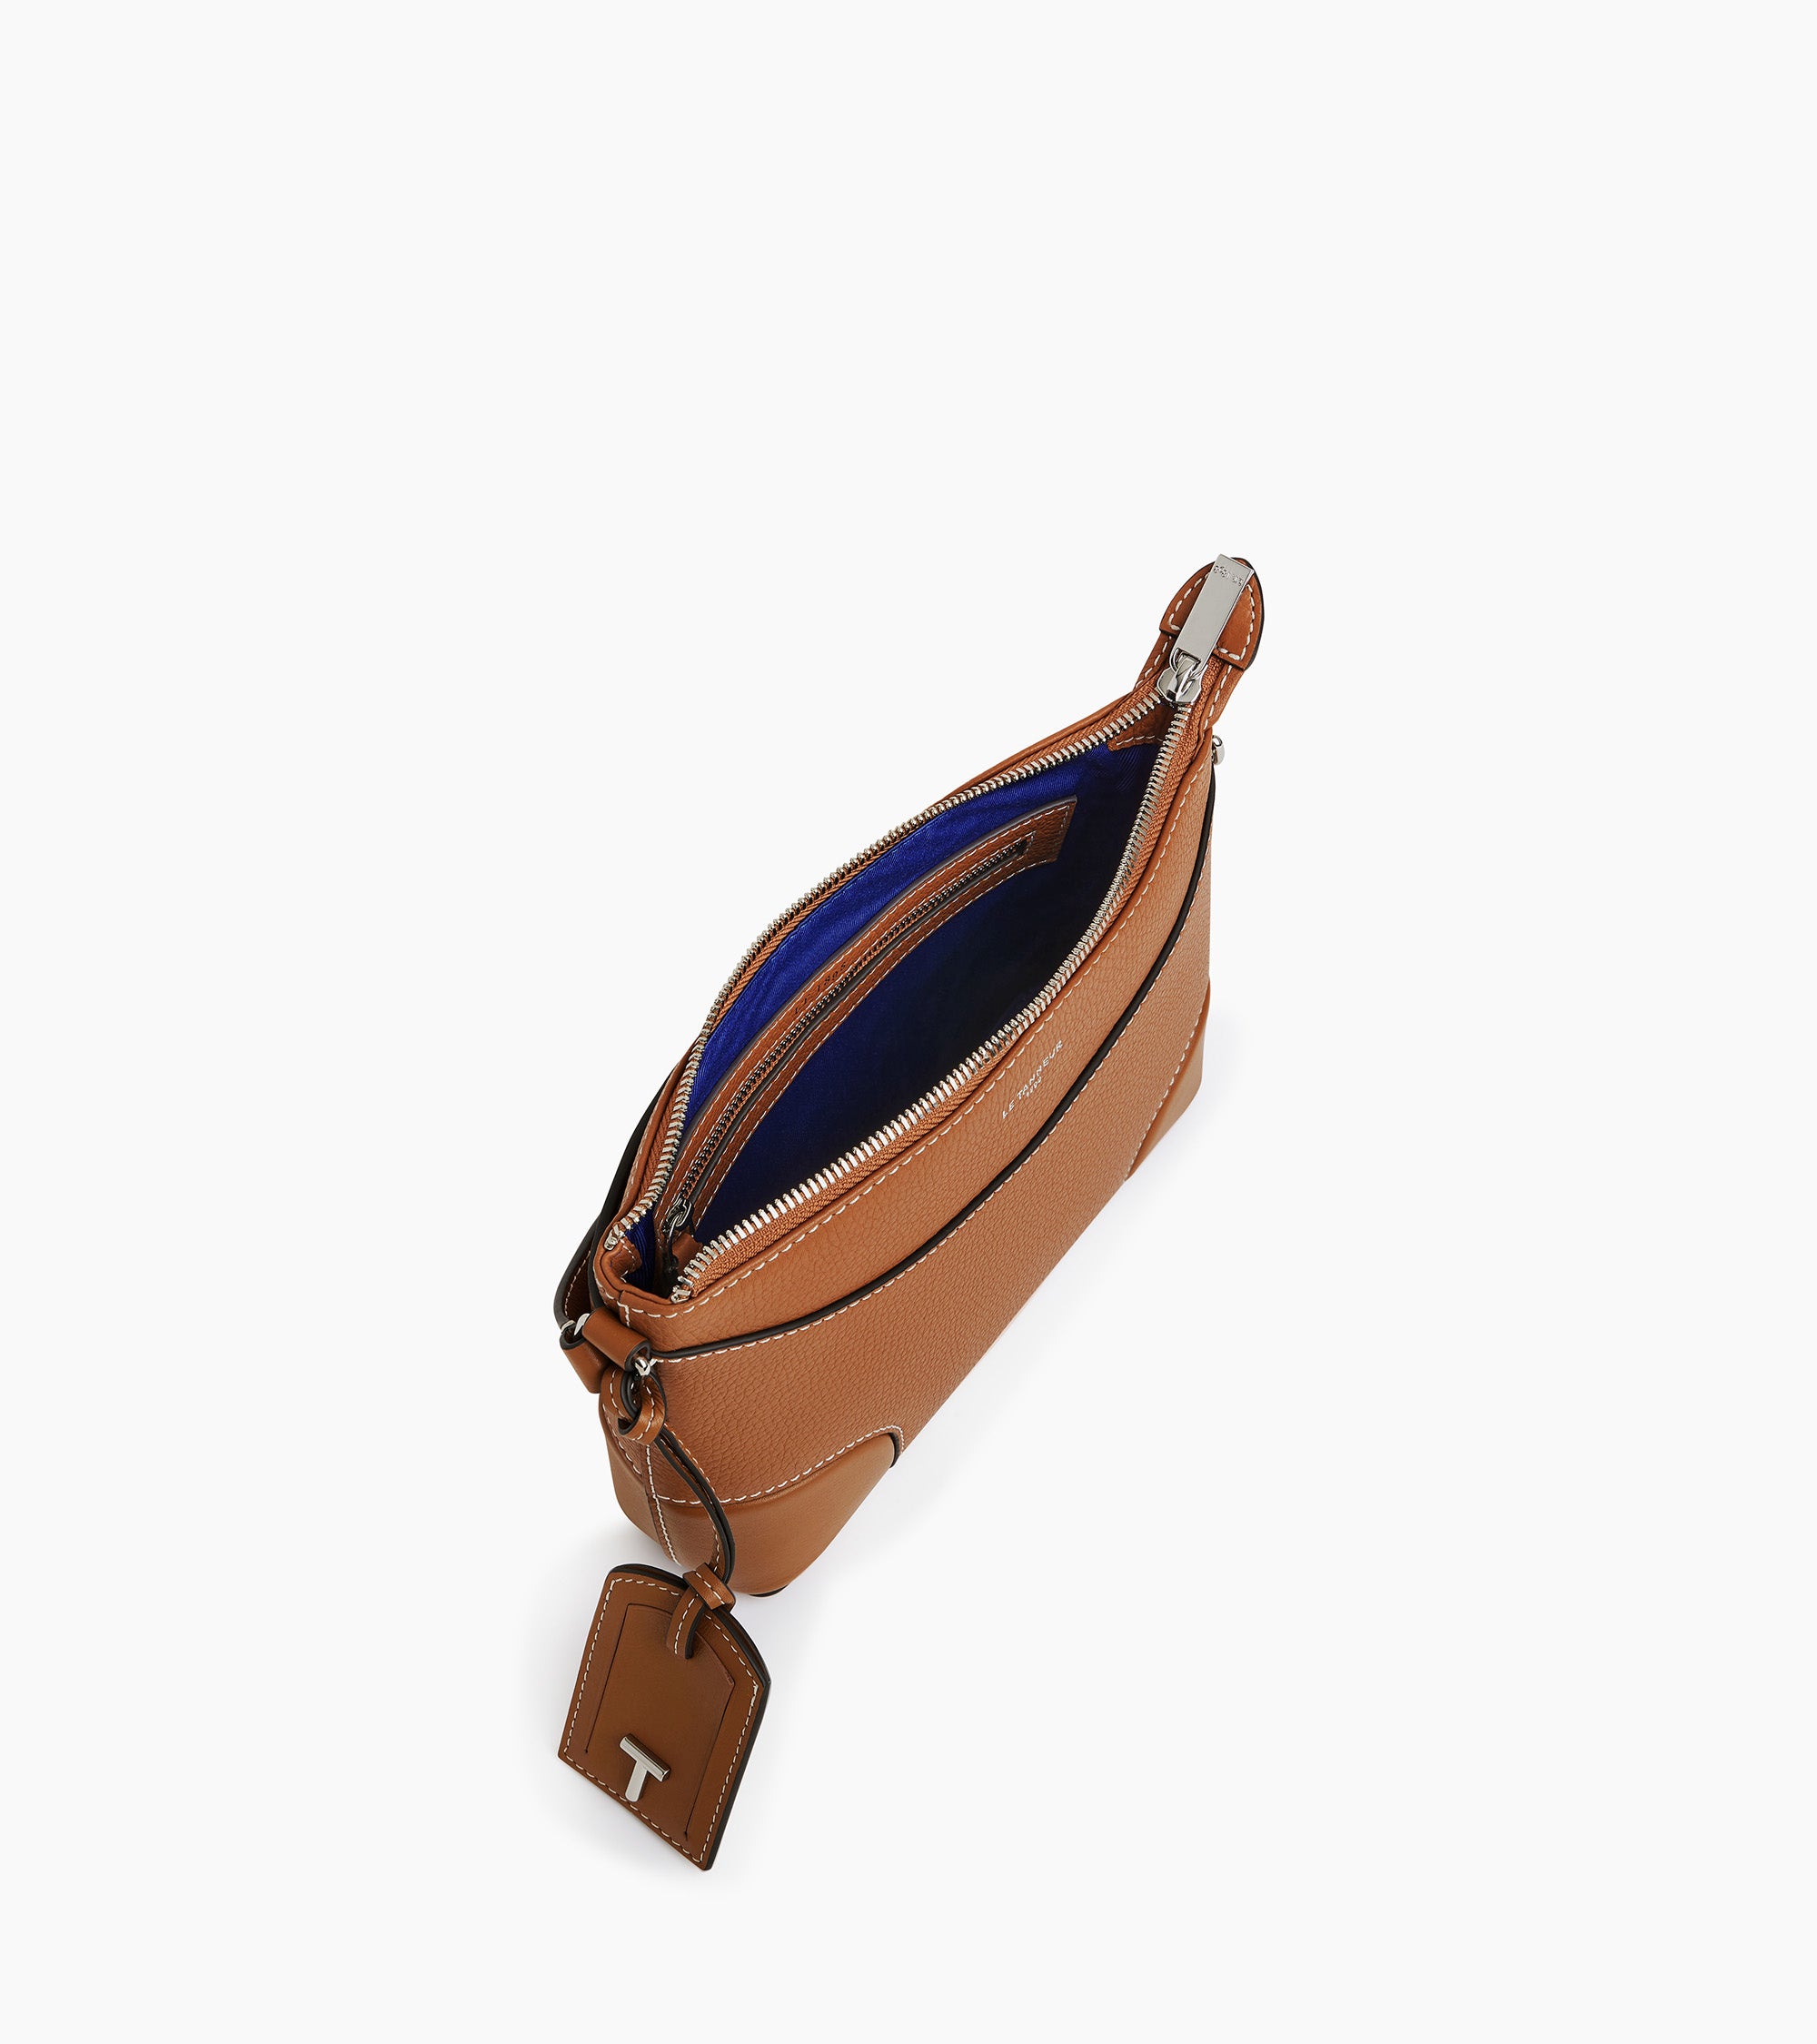 Romy small shoulder bag in smooth grained leather